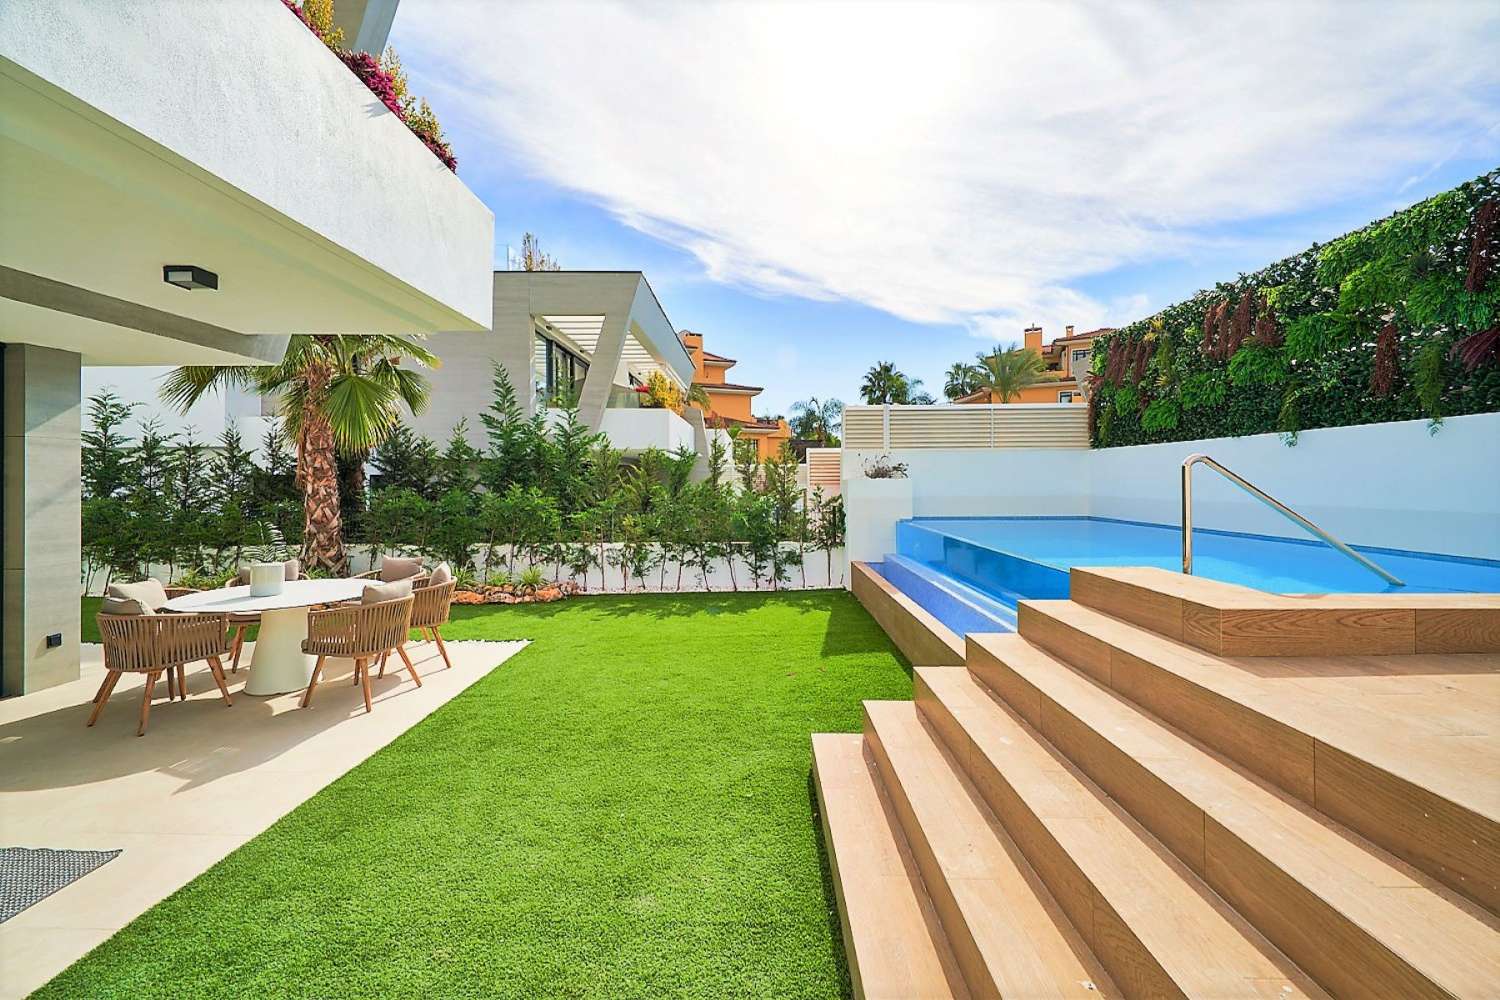 Key Ready semi-detached houses with private pool and full basement, at Puerto Banús beach, and a short walk to the port